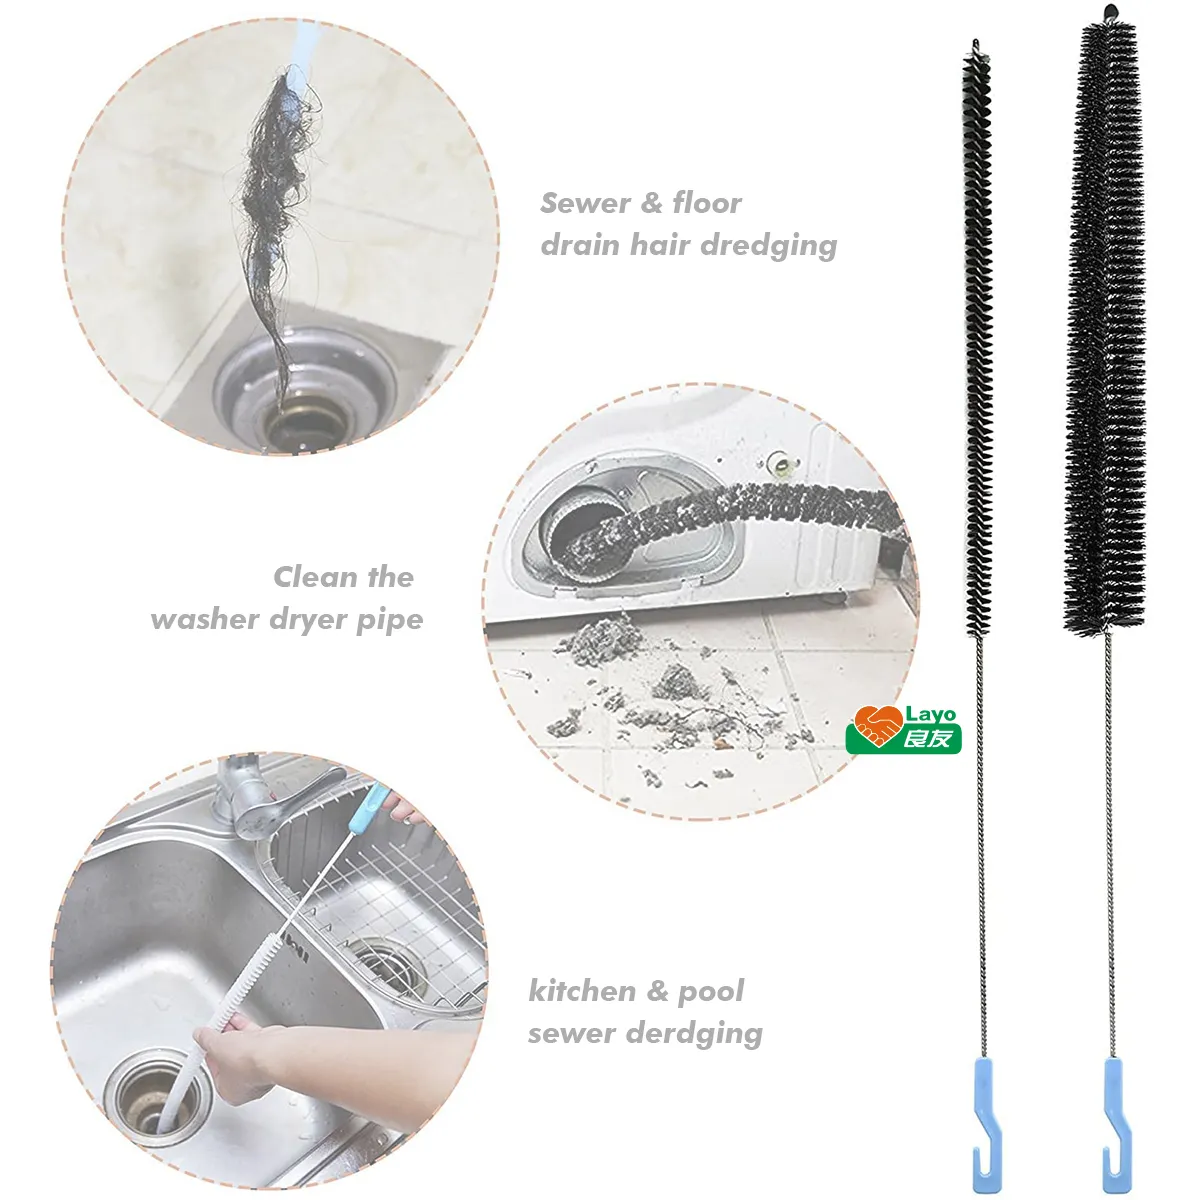 Stainless Steel Pipe Dredge Bendable Hanging Sink Cleaning Tool Brush For Kitchen Toilet Sewer Water Pipe Dryer Vent Dust Hose